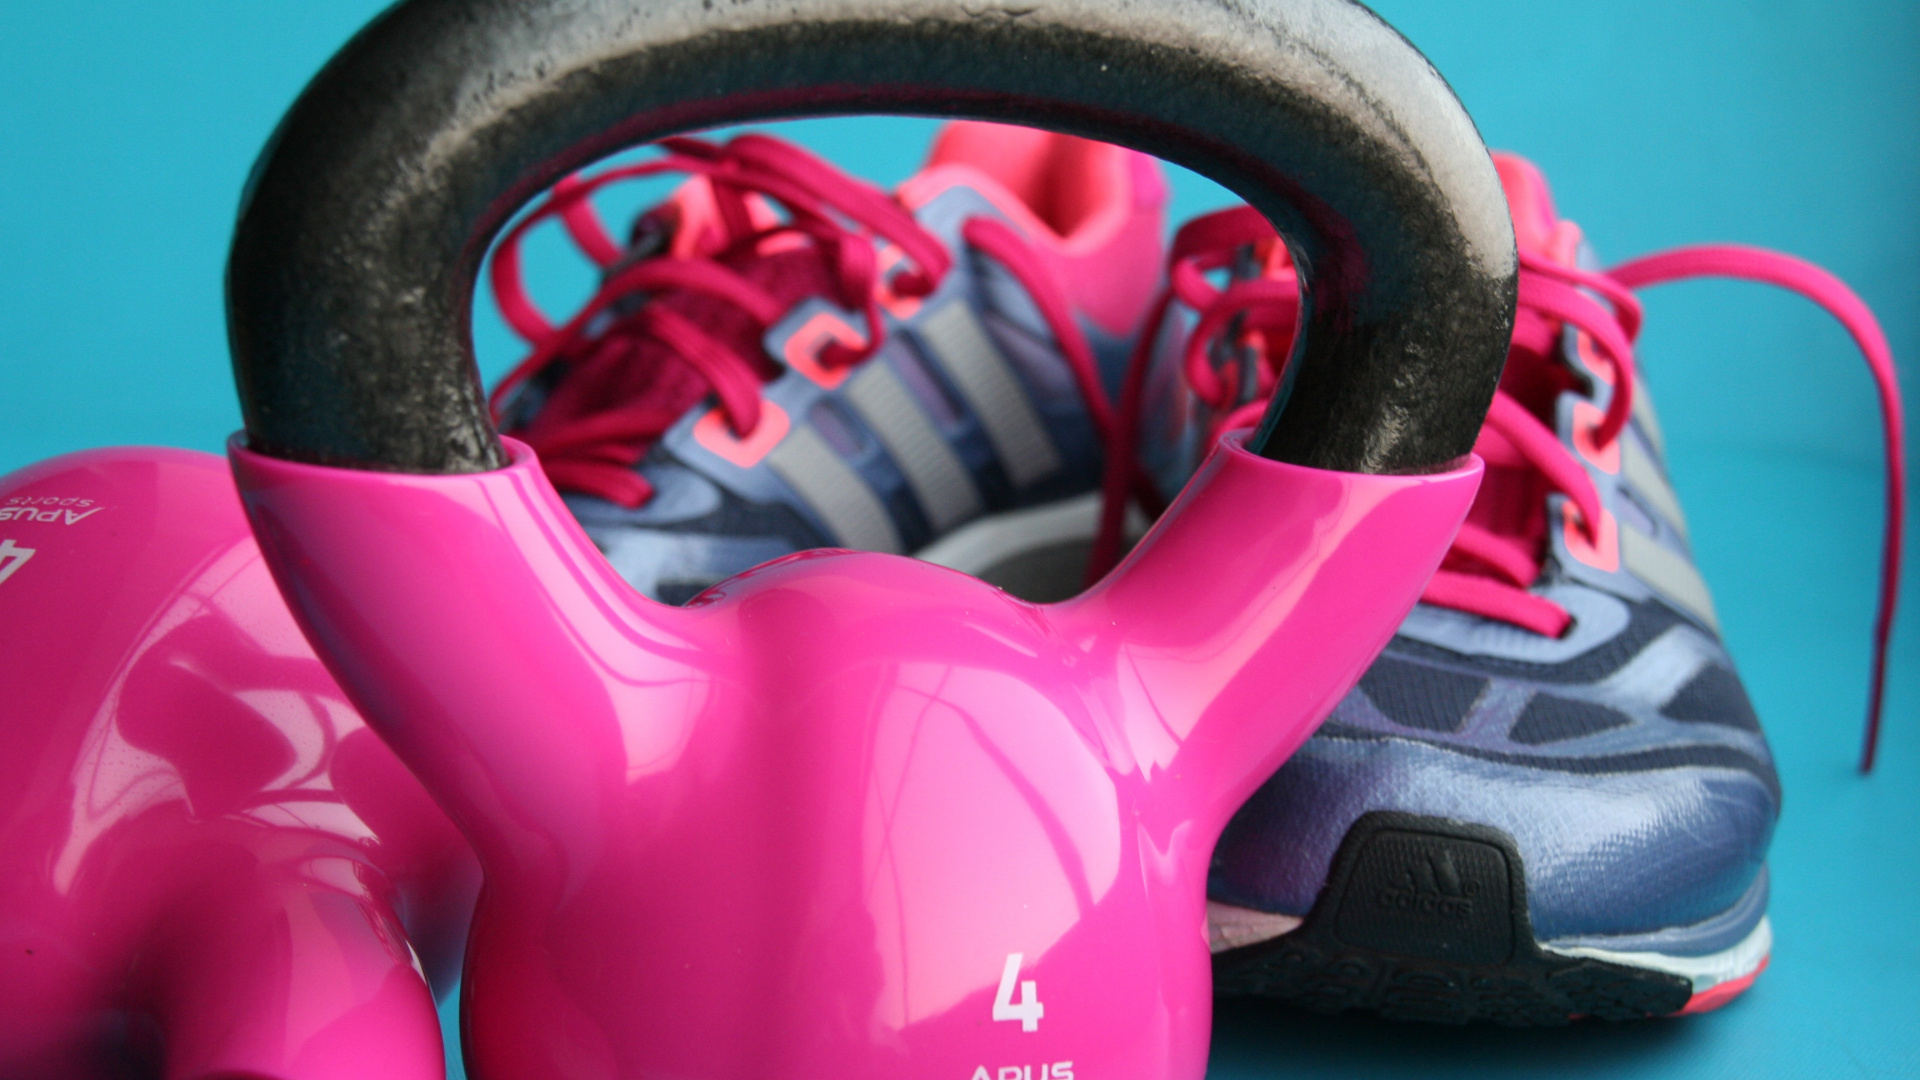 Pink and Black Kettle Bell. Wallpaper in 1920x1080 Resolution